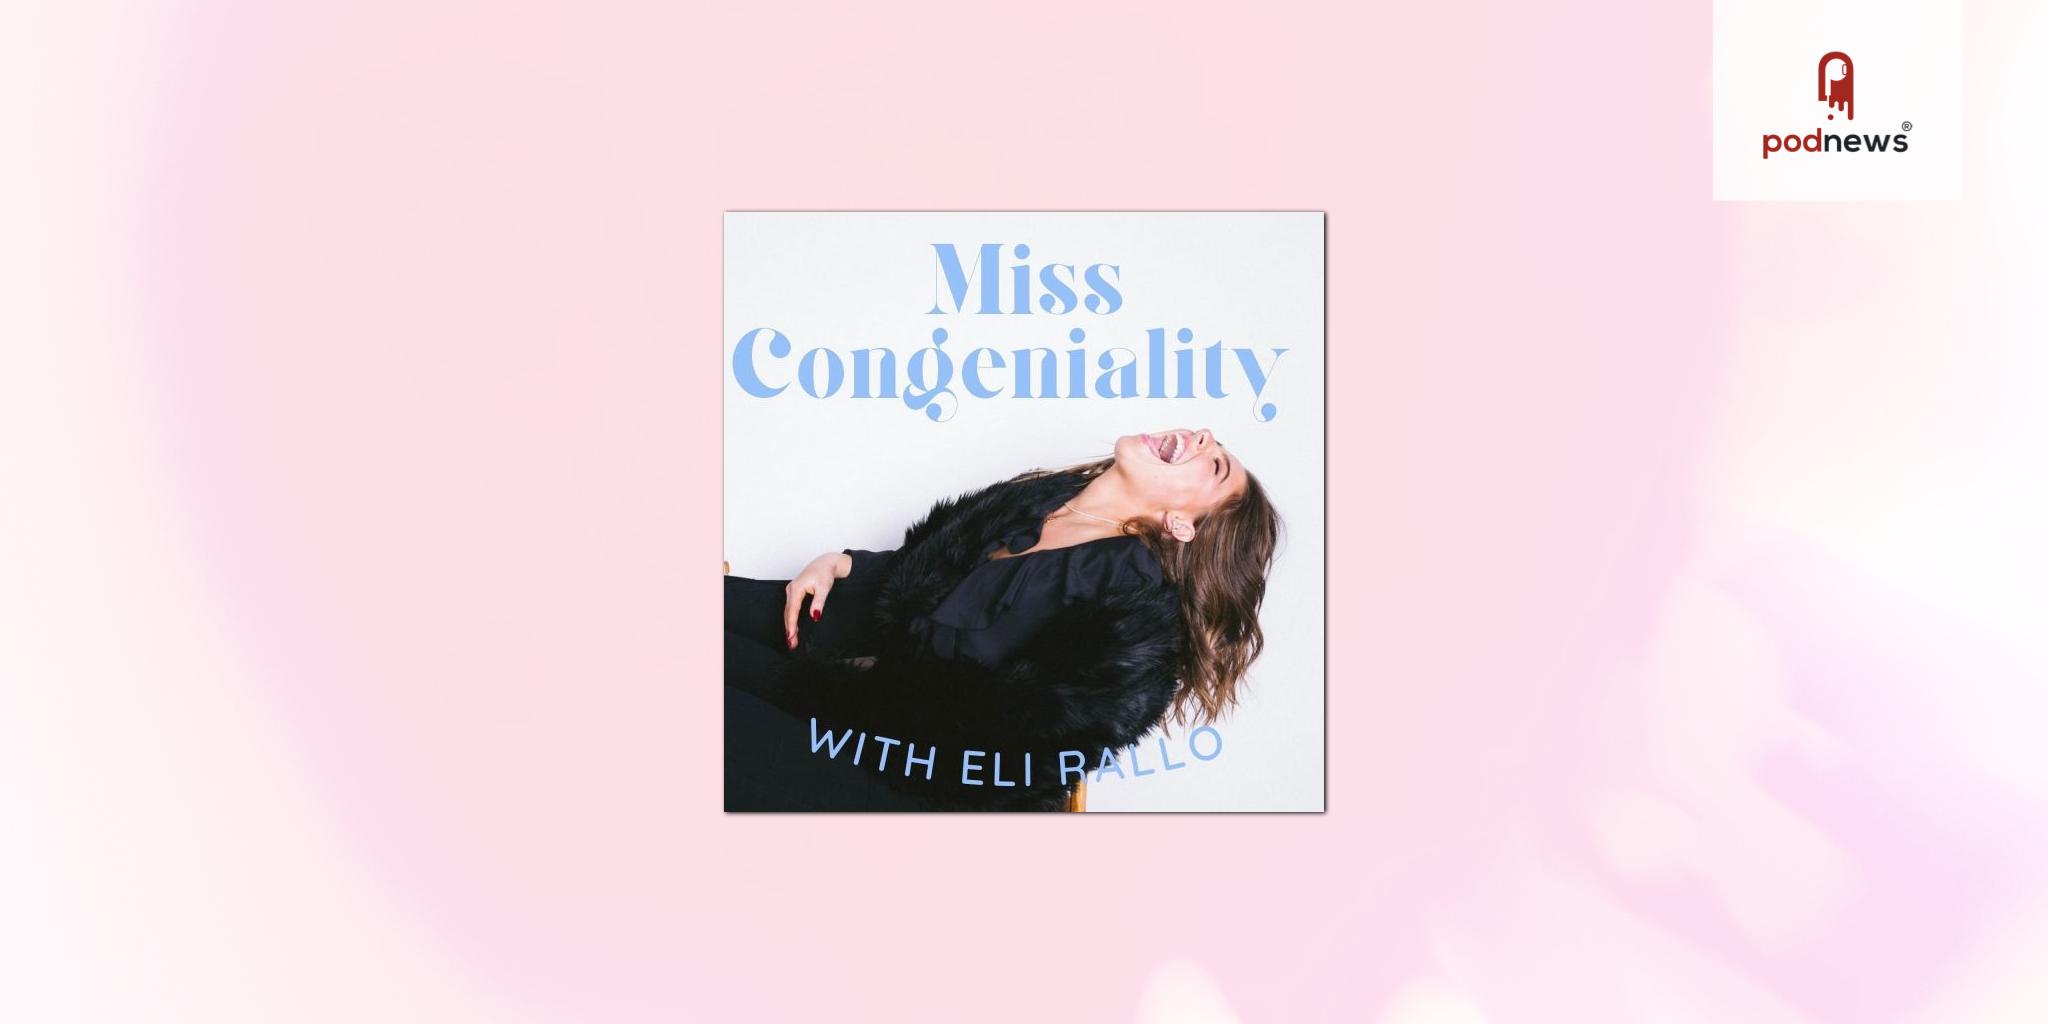 CAKE MEDIA  Announces That  Eli Rallo’s Miss Congeniality Podcast Joins the Network